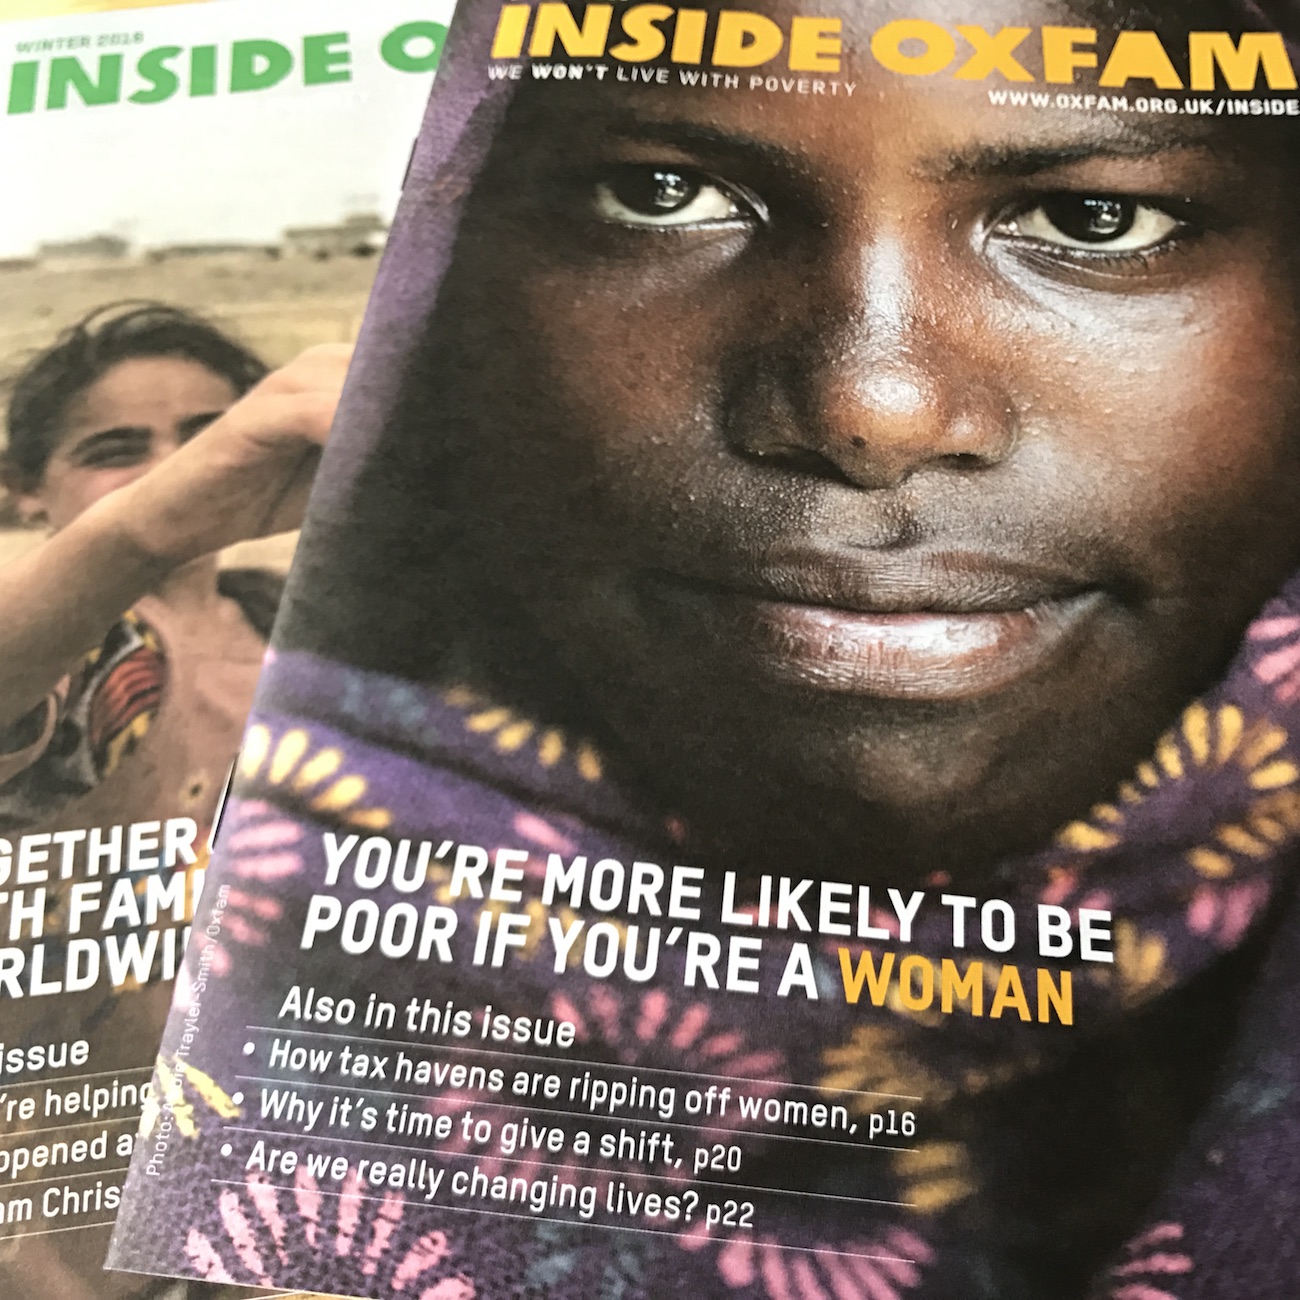 Inside Oxfam supporter magazine covers